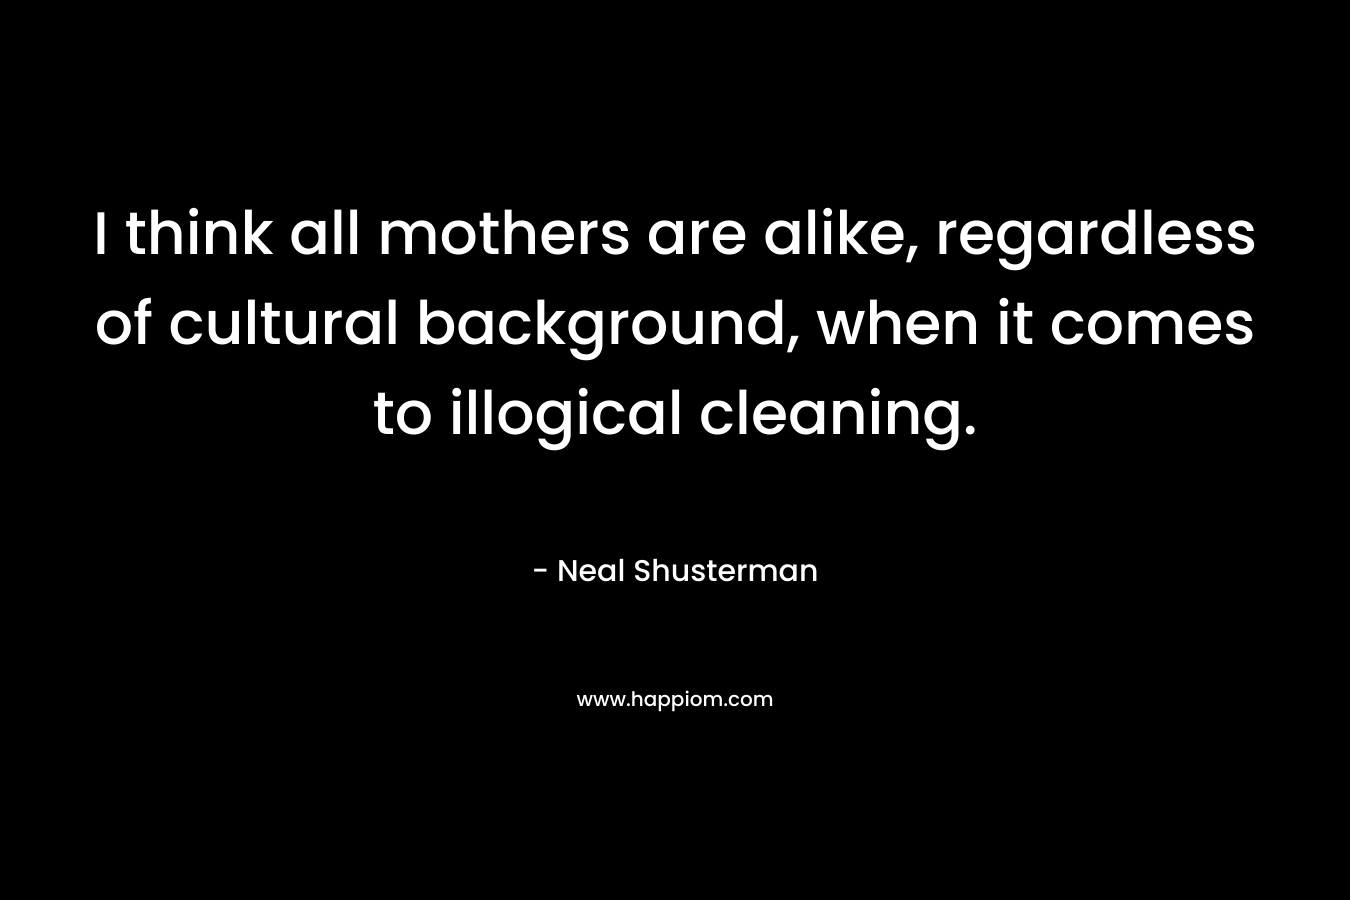 I think all mothers are alike, regardless of cultural background, when it comes to illogical cleaning.